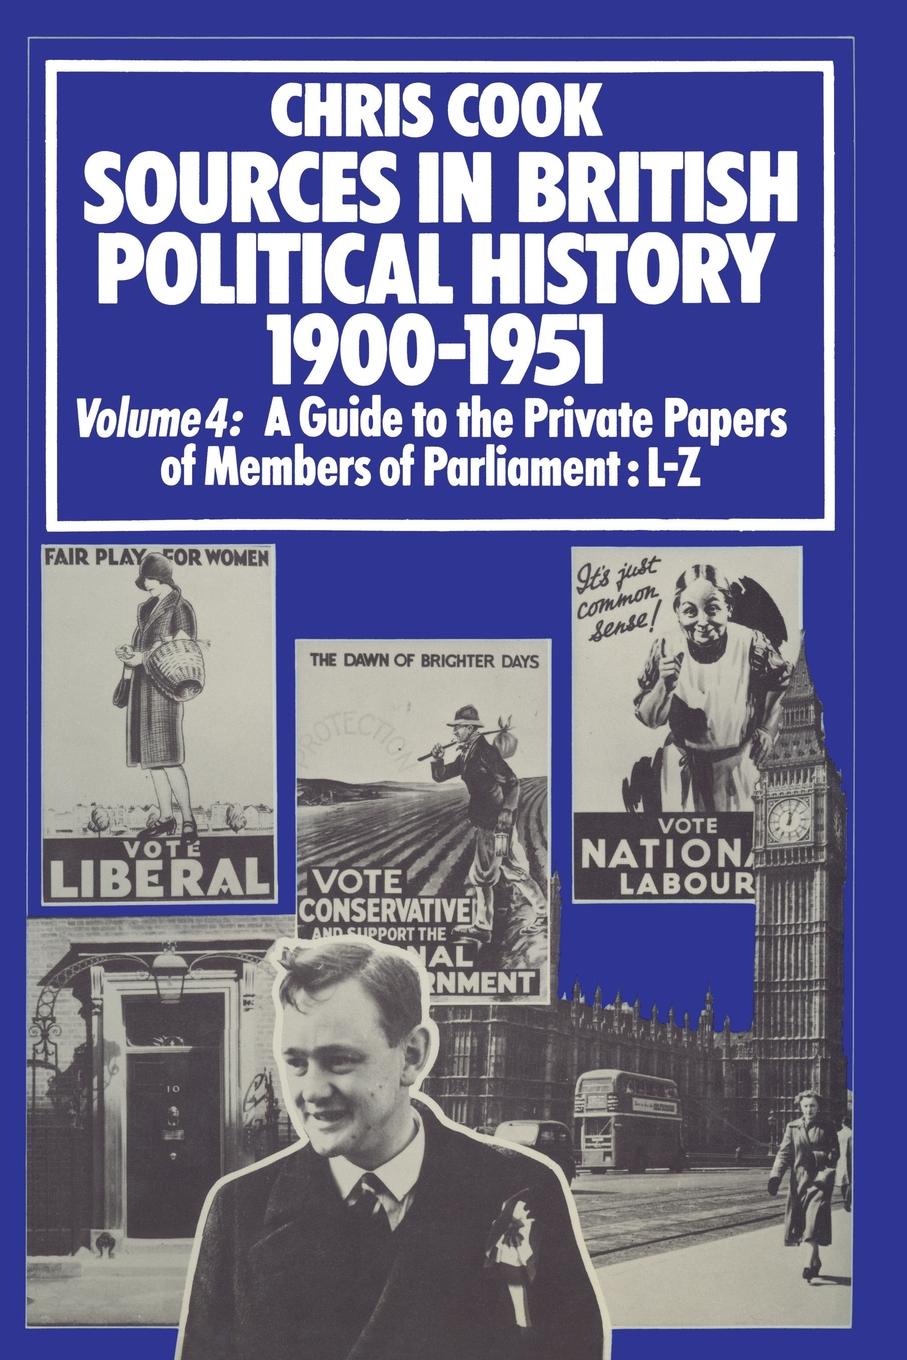 Sources in British Political History 1900-1951. Volume 4: A Guide to the Private Papers of Members of Parliament: L-Z